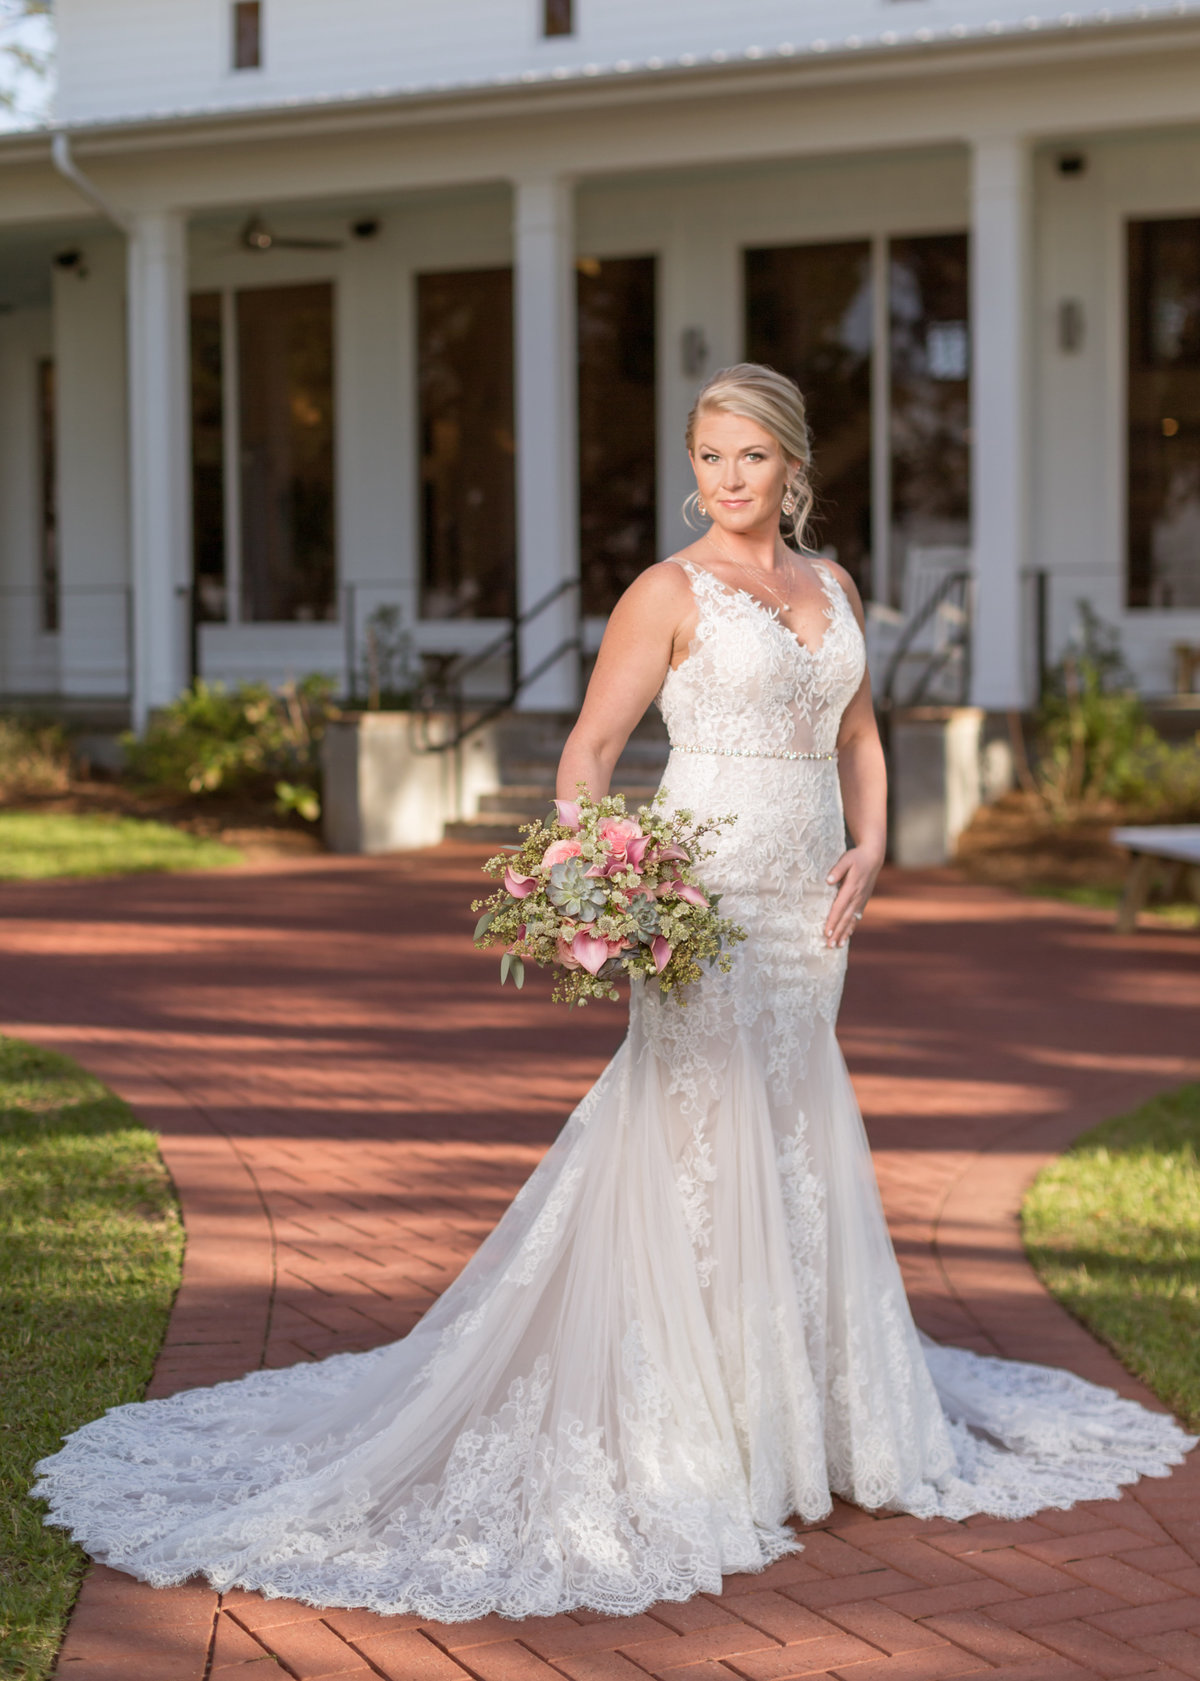 Erin Childress poses for a photo during her bridal session at The Coastal Arts Center in Orange Beach, Alabama.